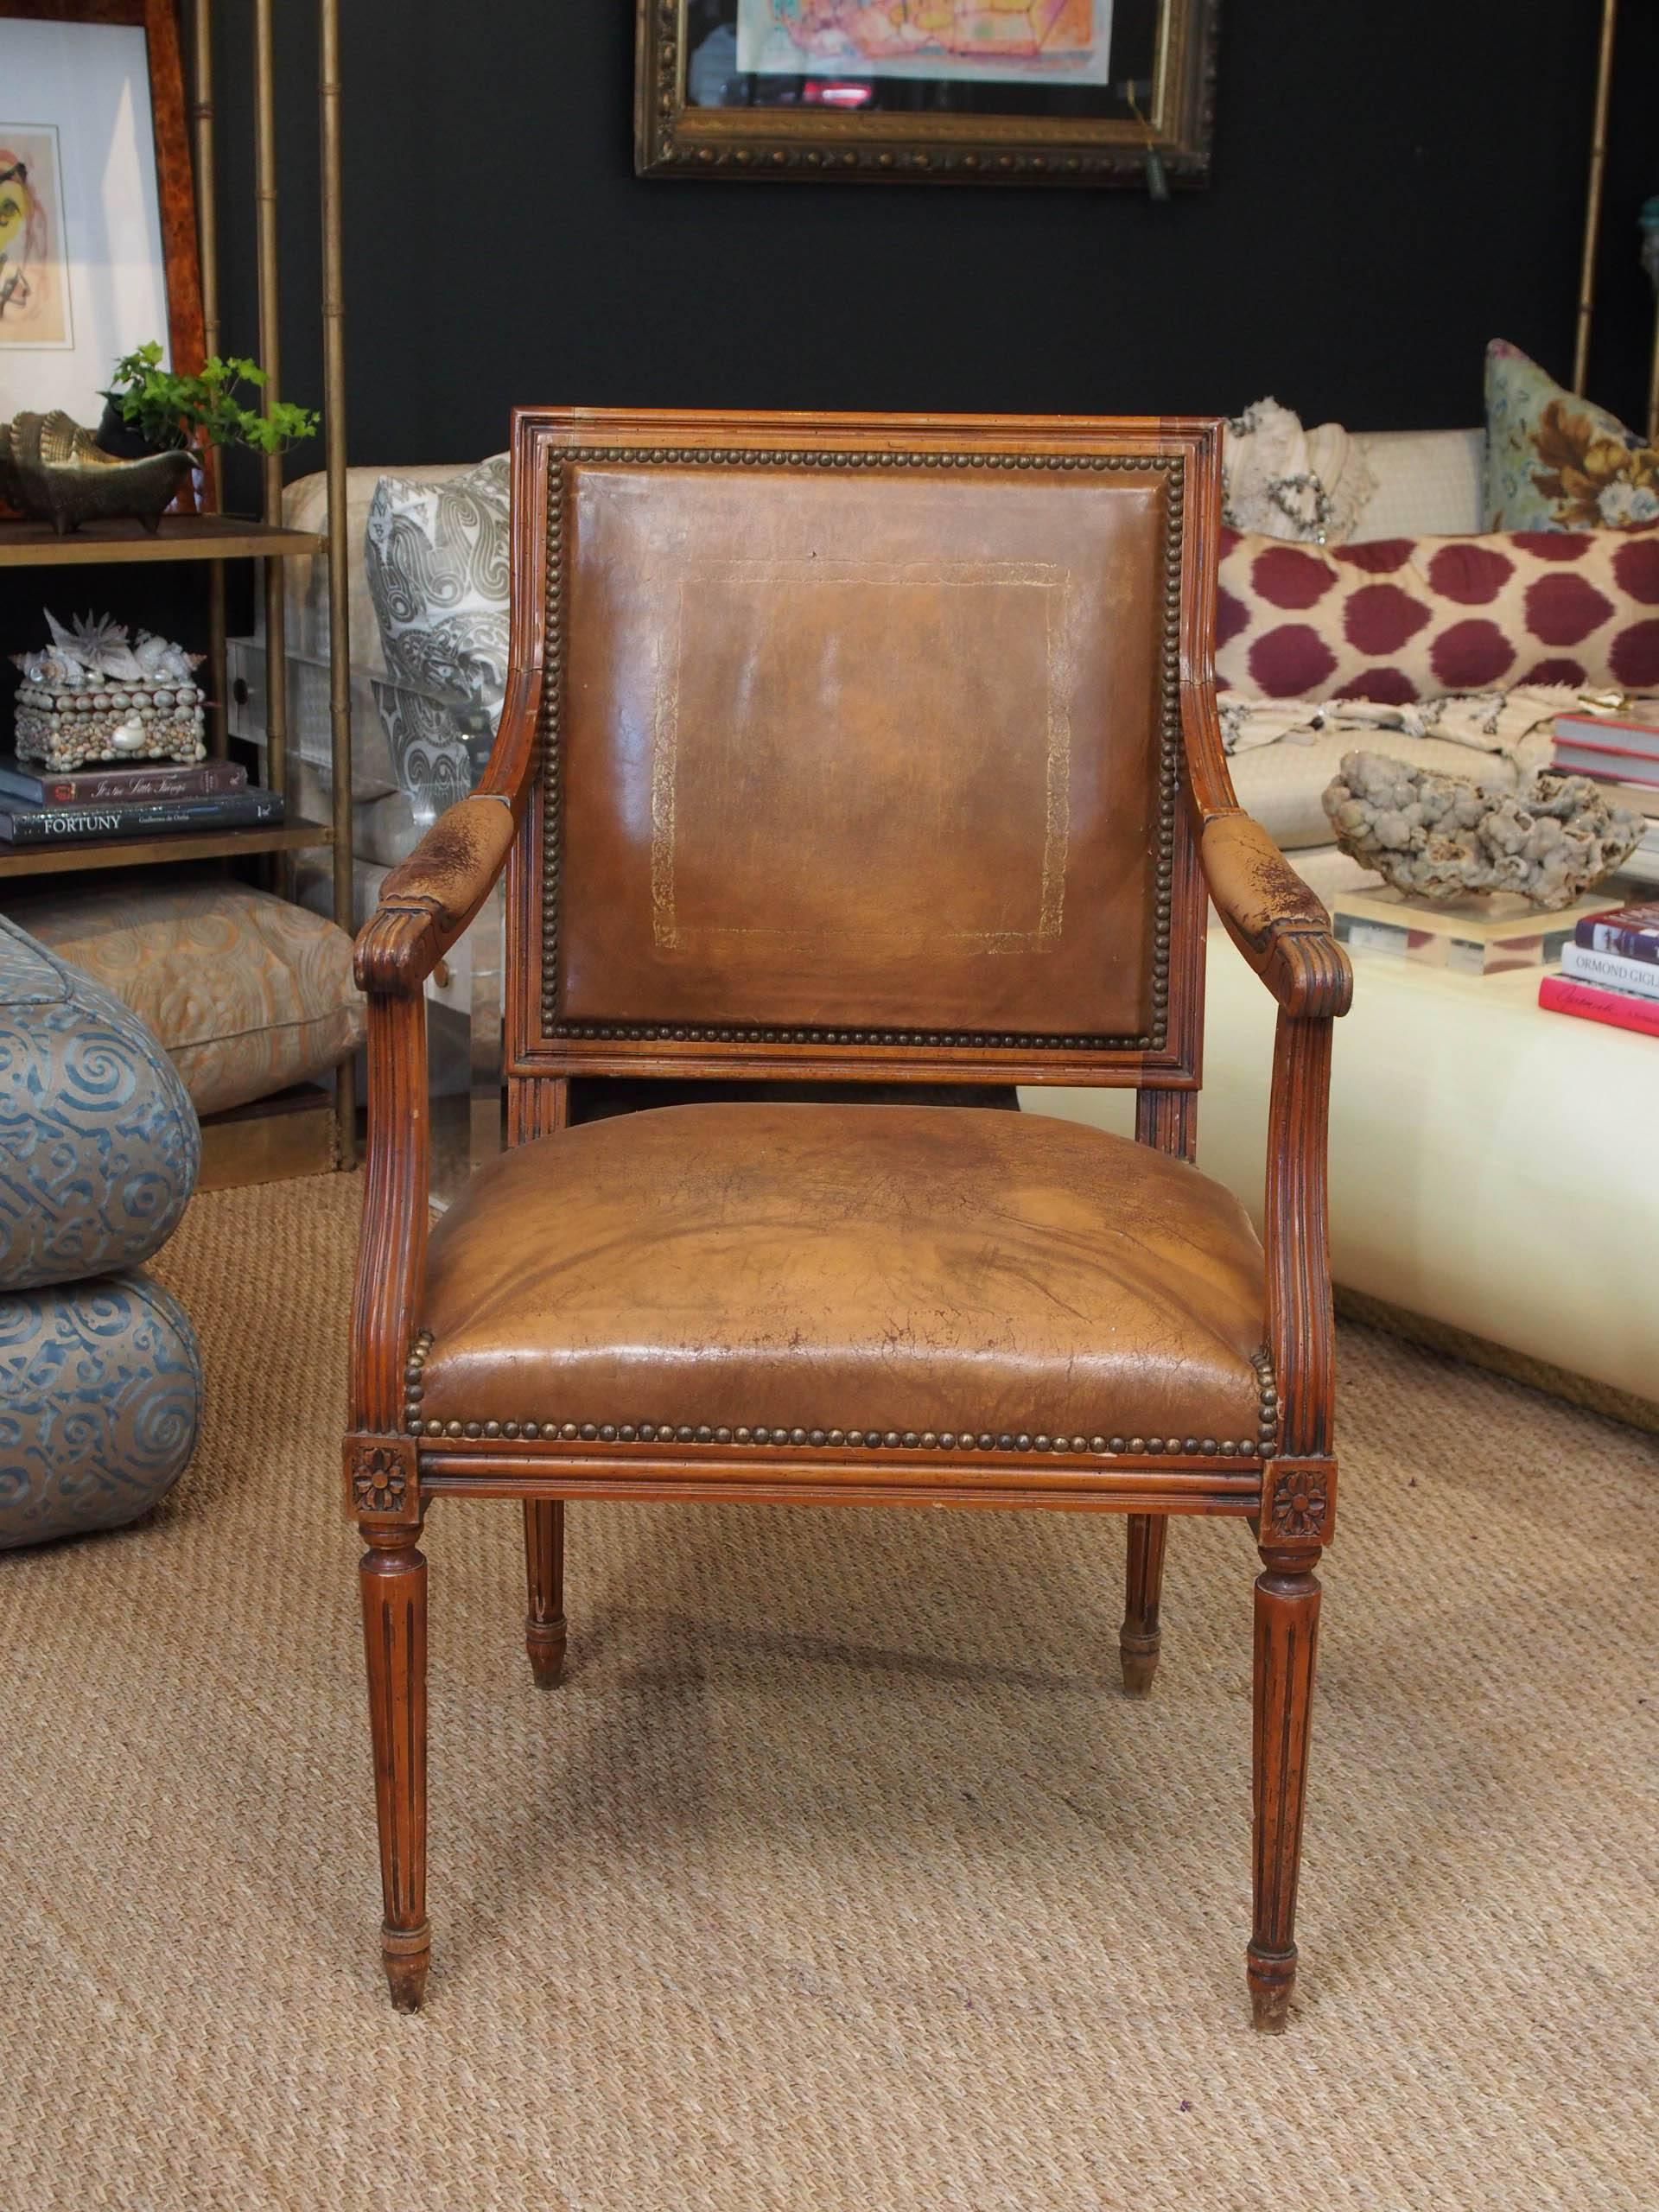 Louis XVI style walnut fauteuil chair with original leather and nailhead trim.